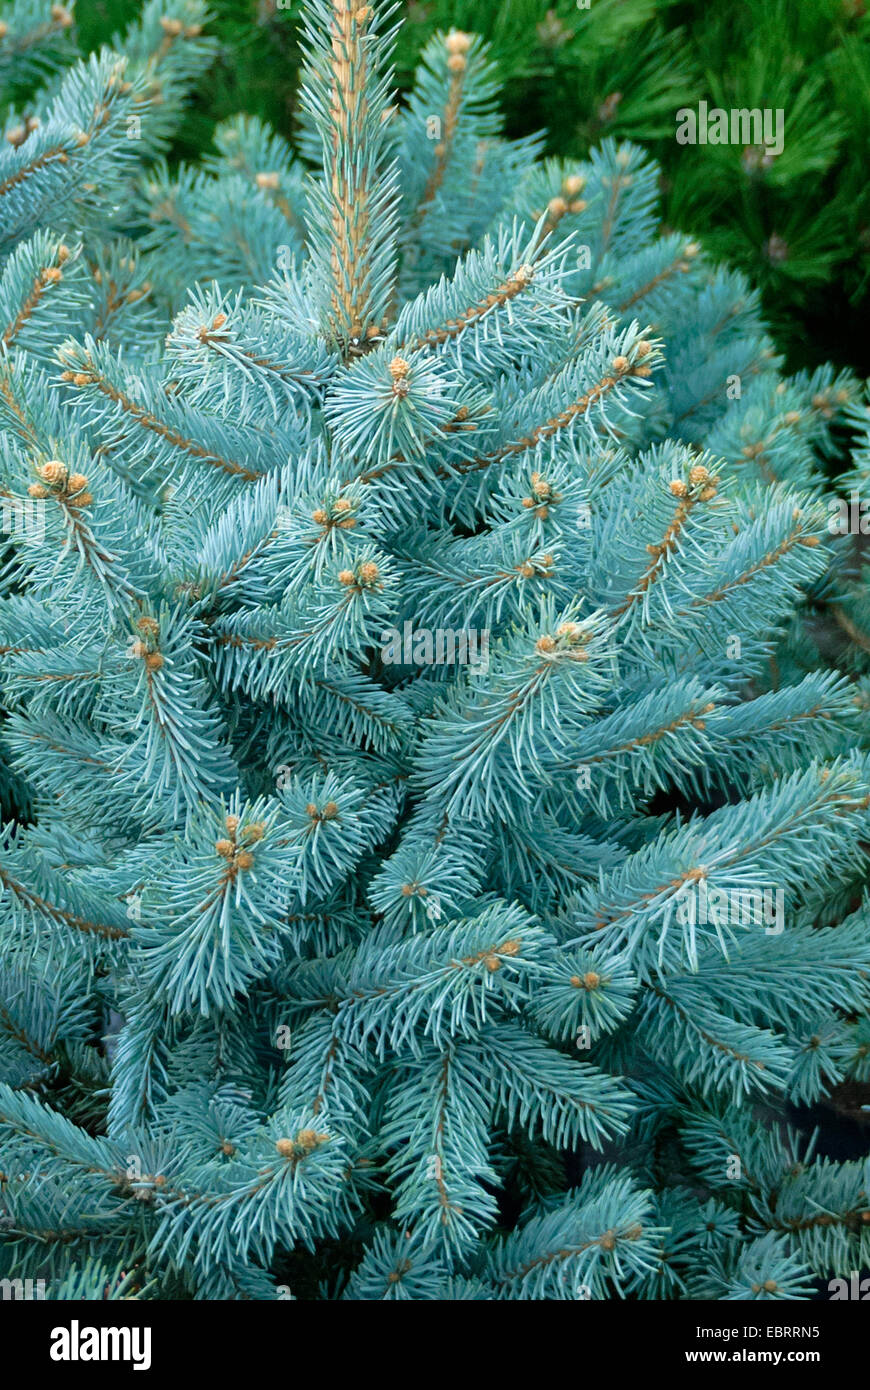 Colorado blue spruce (Picea pungens 'Hoopsii', Picea pungens Hoopsii), cultivar Hoopsii, Mannheim Stock Photo